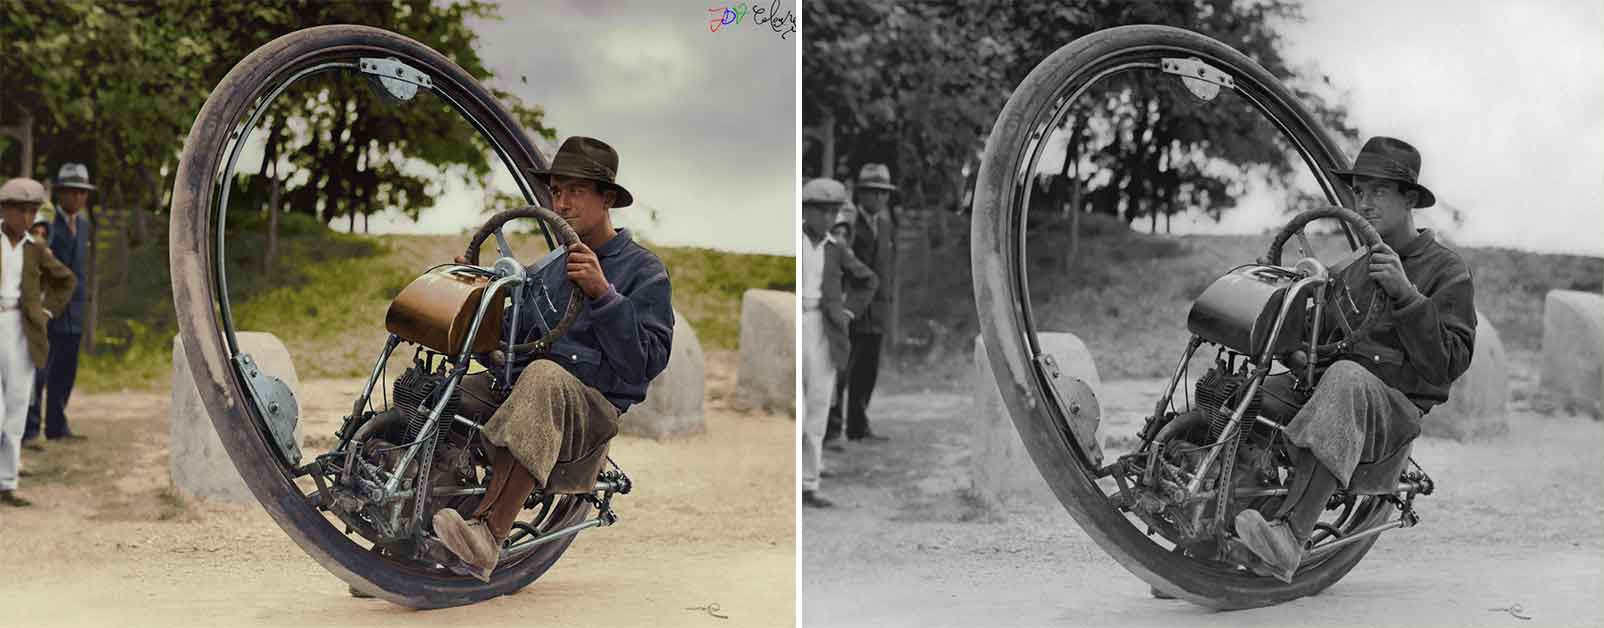 21 Historic Black-and-White Photos Brought to Life With Color